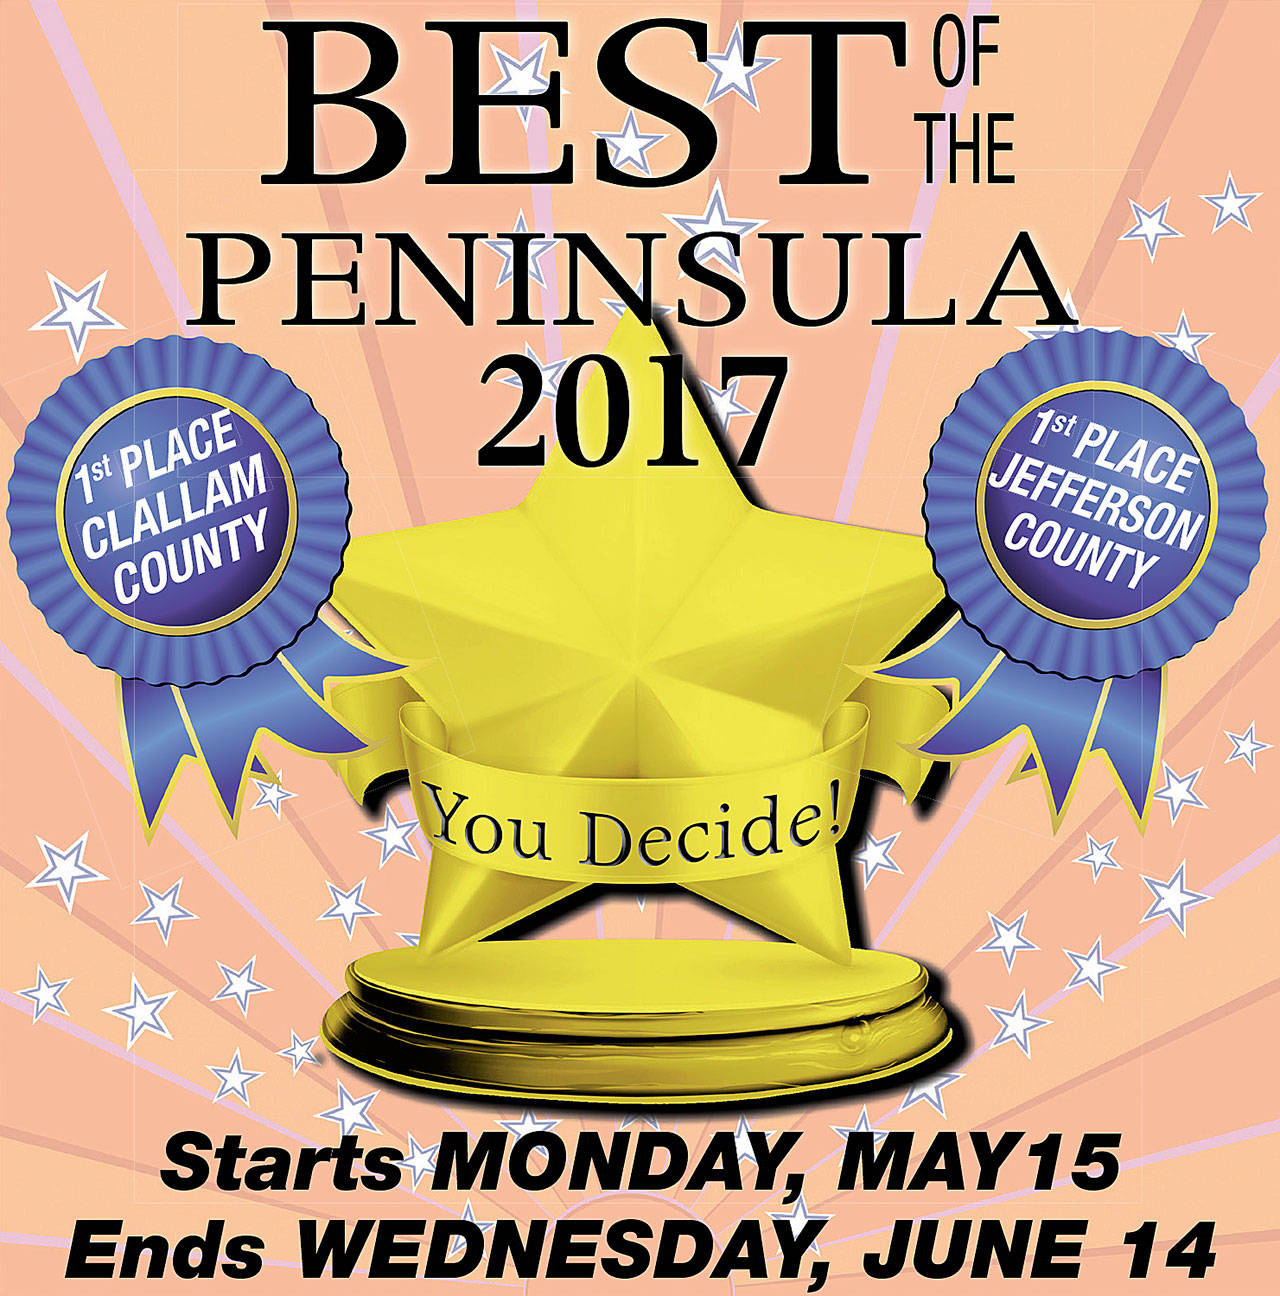 YOU DECIDE! Best of the Peninsula 2017 voting begins